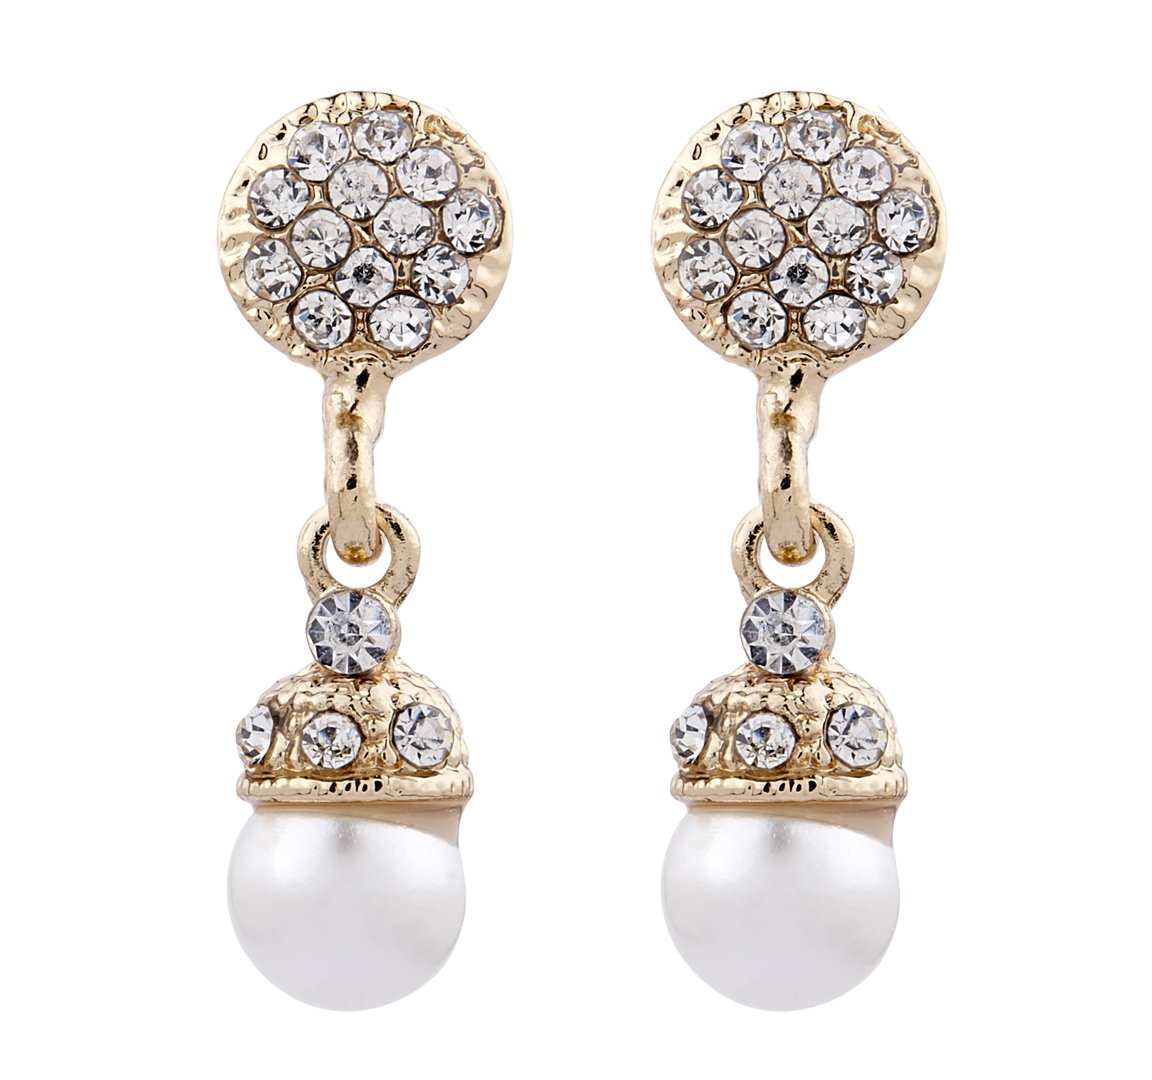 Clip On Earrings - Bell G - gold pearl drop earring with clear crystals